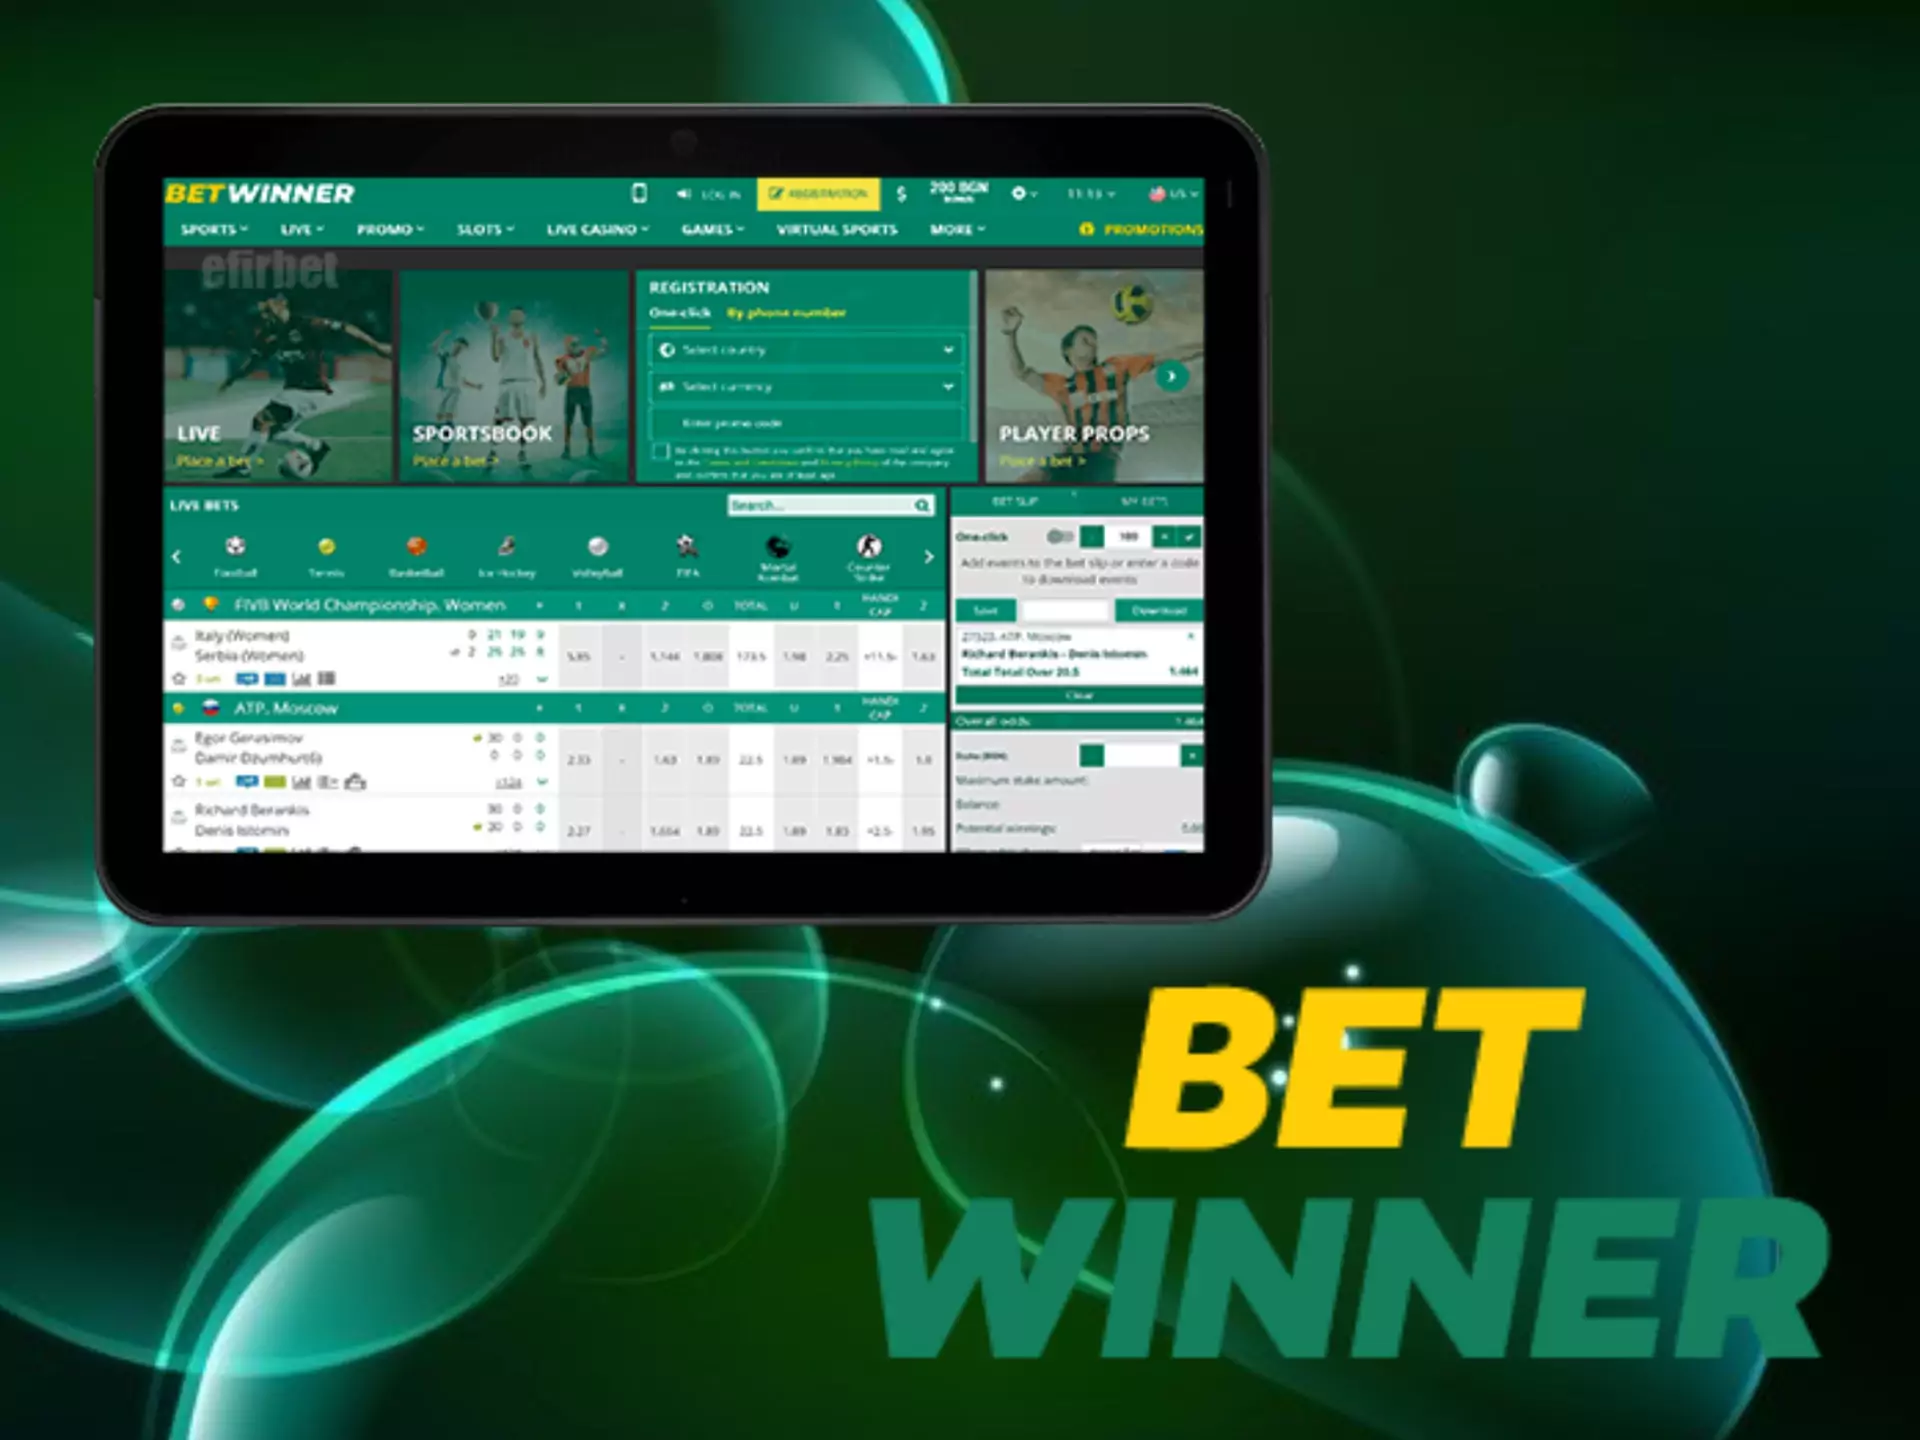 You can bet at Betwinner app via your iPhone or iPad.